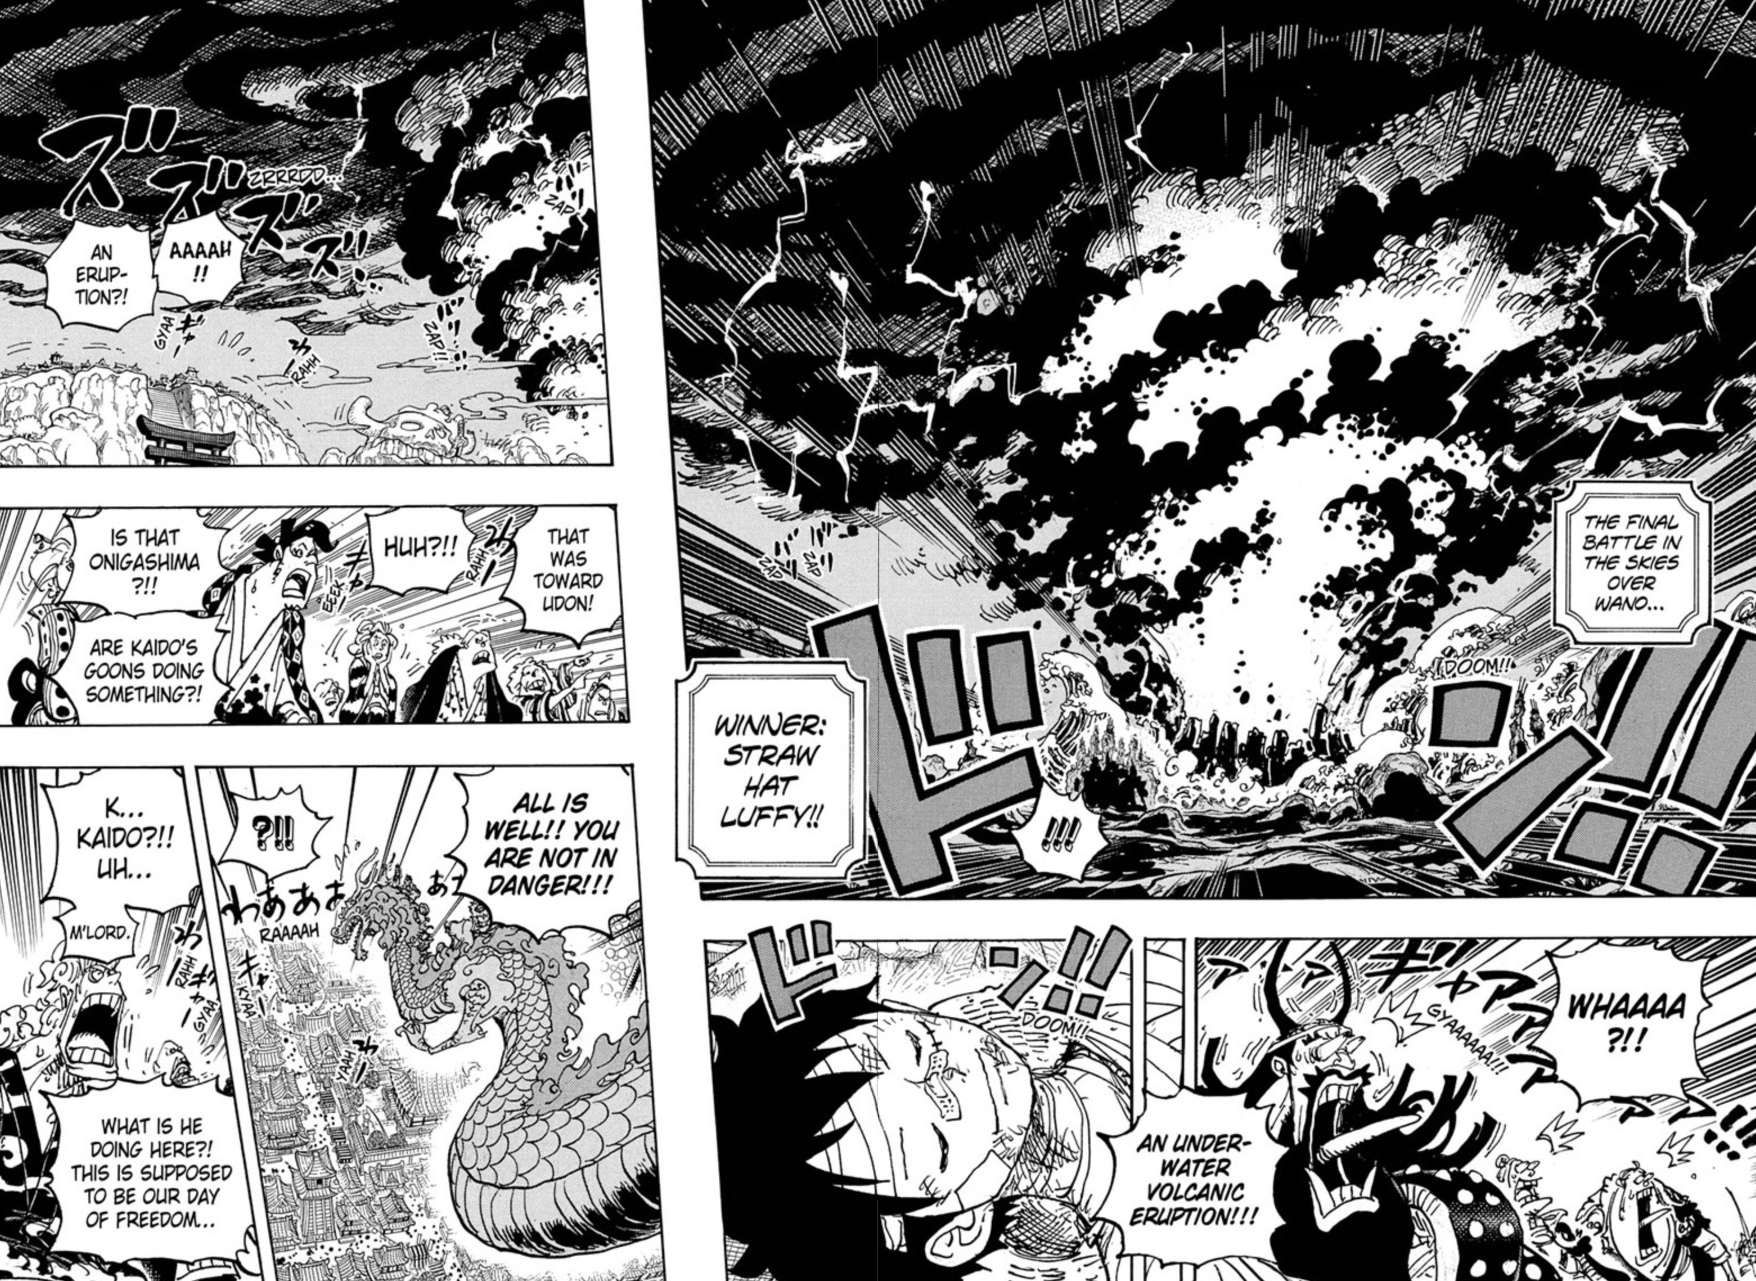 One Piece Chapter 1050 Pages 14-15